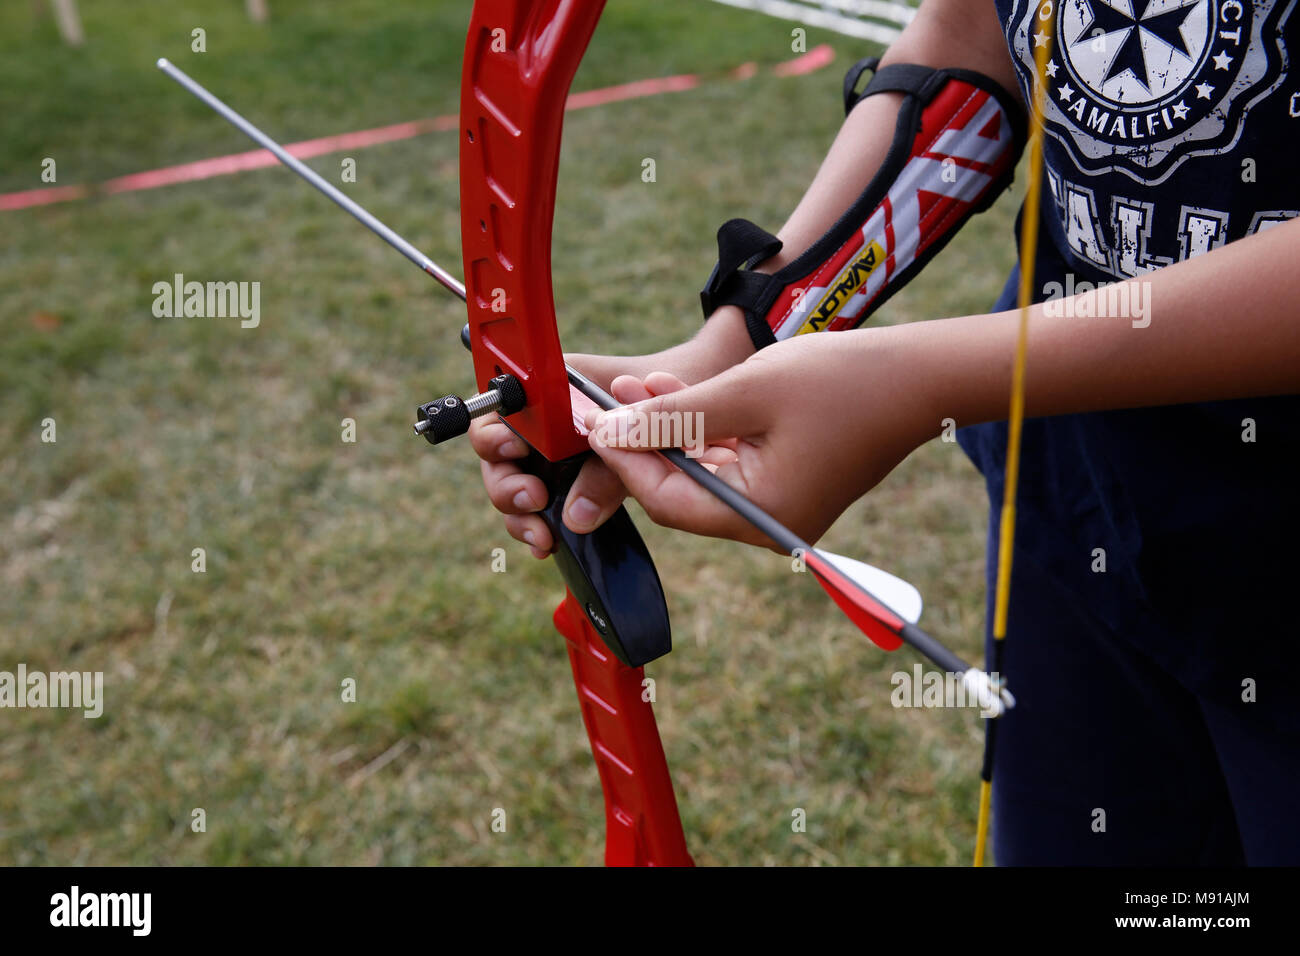 11-year-old boy practising archery in Paris, France. Stock Photo